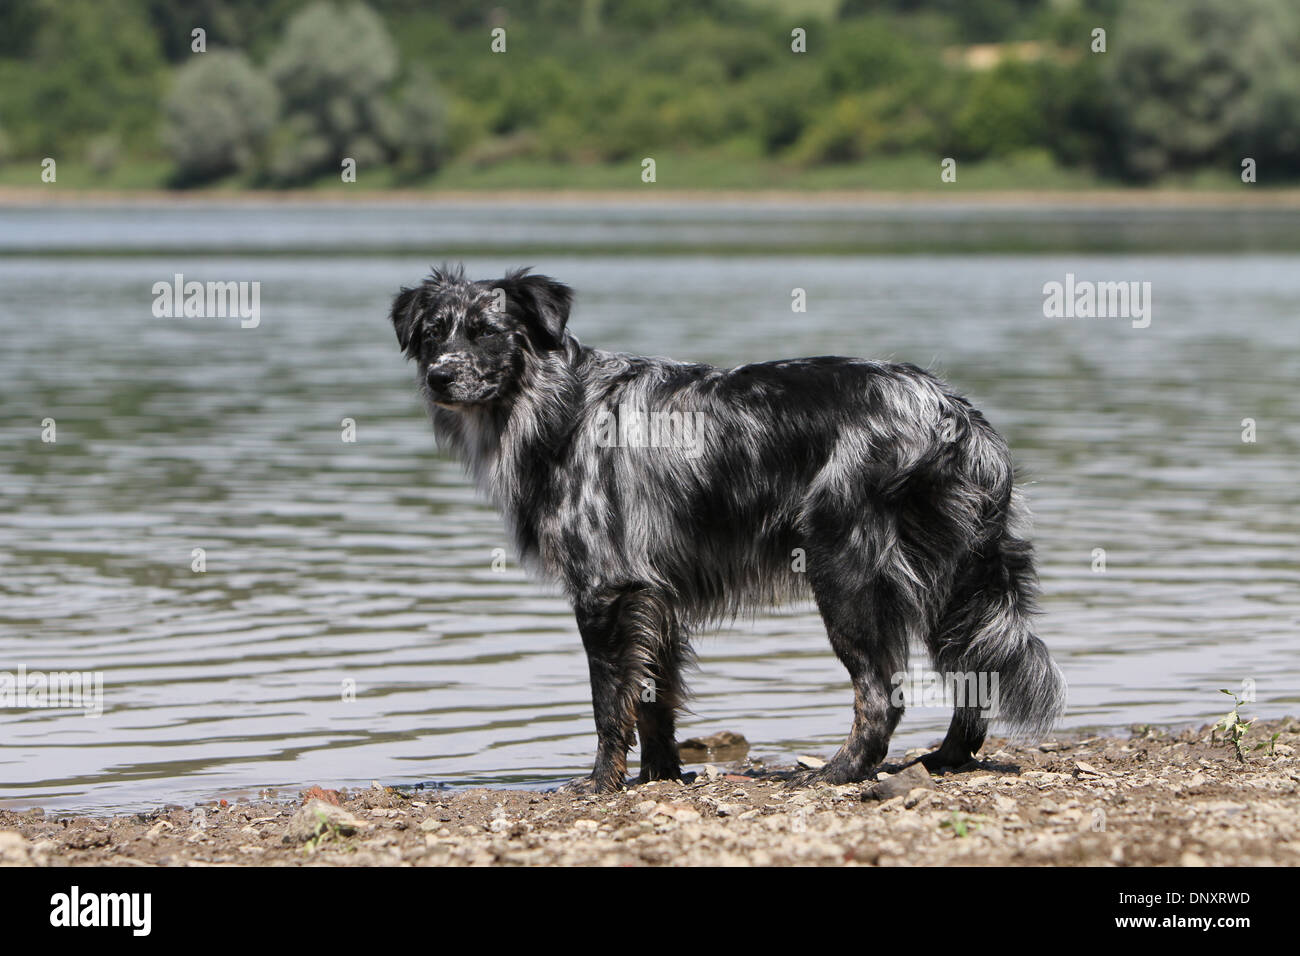 Dog shepherd / Aussie adult merle) standing at the edge of a lake Photo -